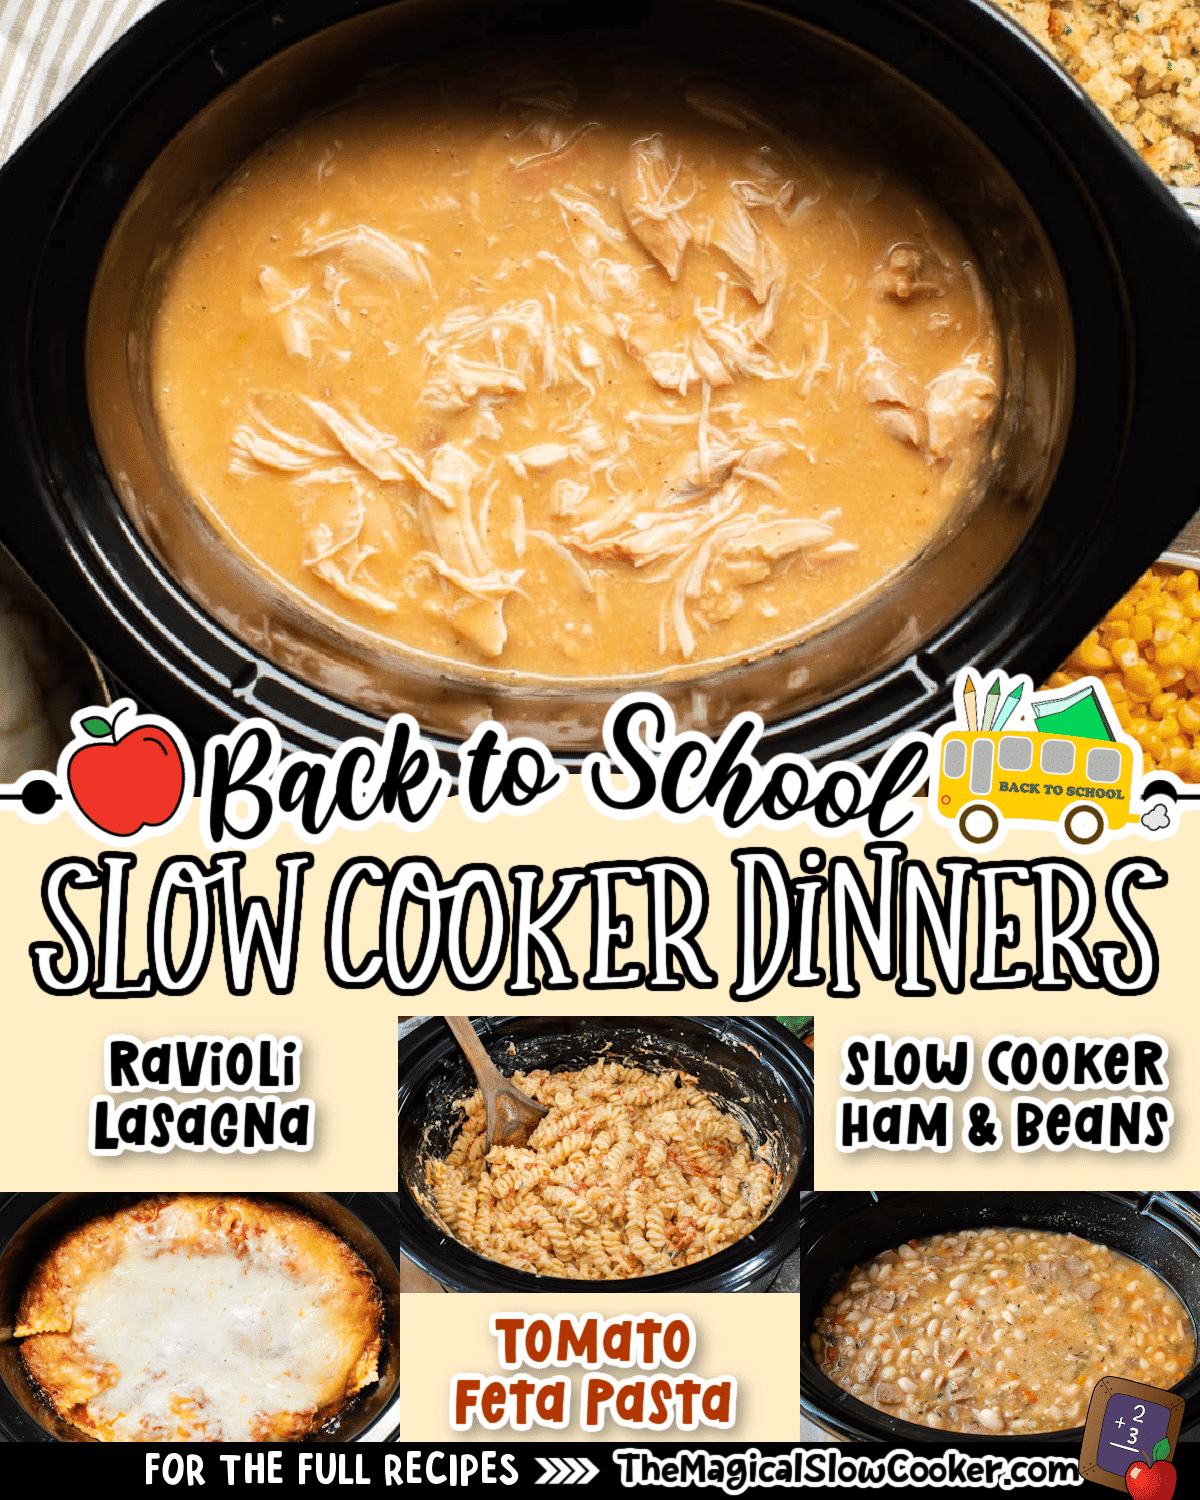 Images of back to school dinners with text overlay of what the ingredients are.